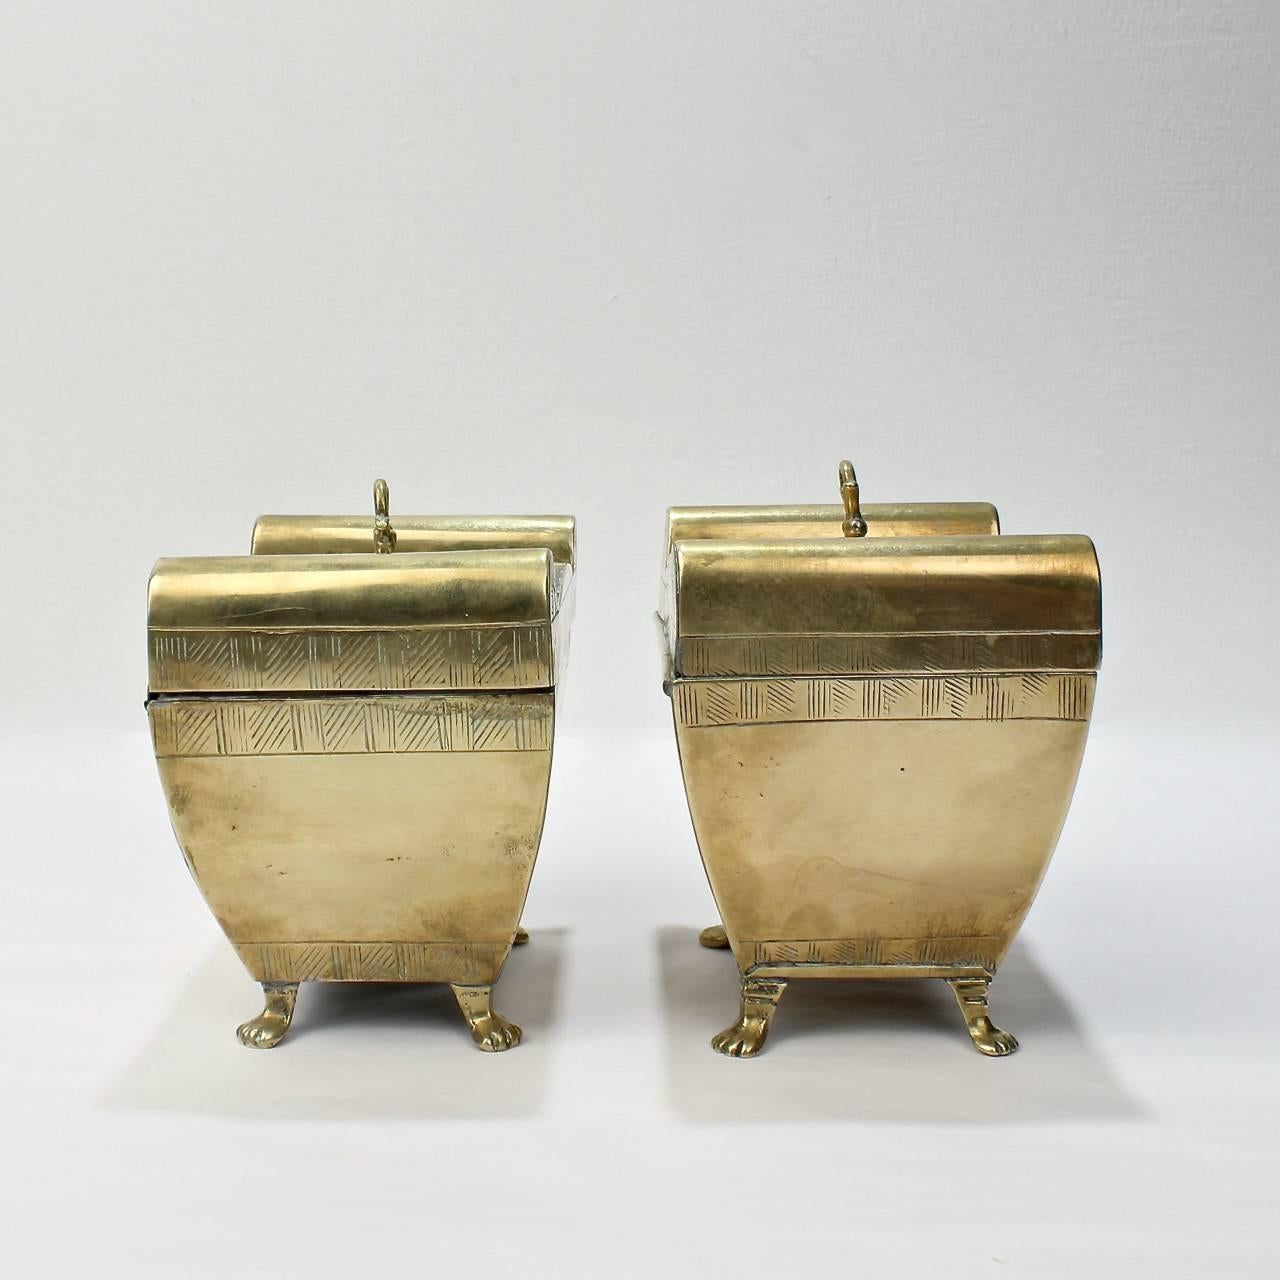 Matched Pair of English Colonial or Anglo-Indian Brass Tea Caddies 1